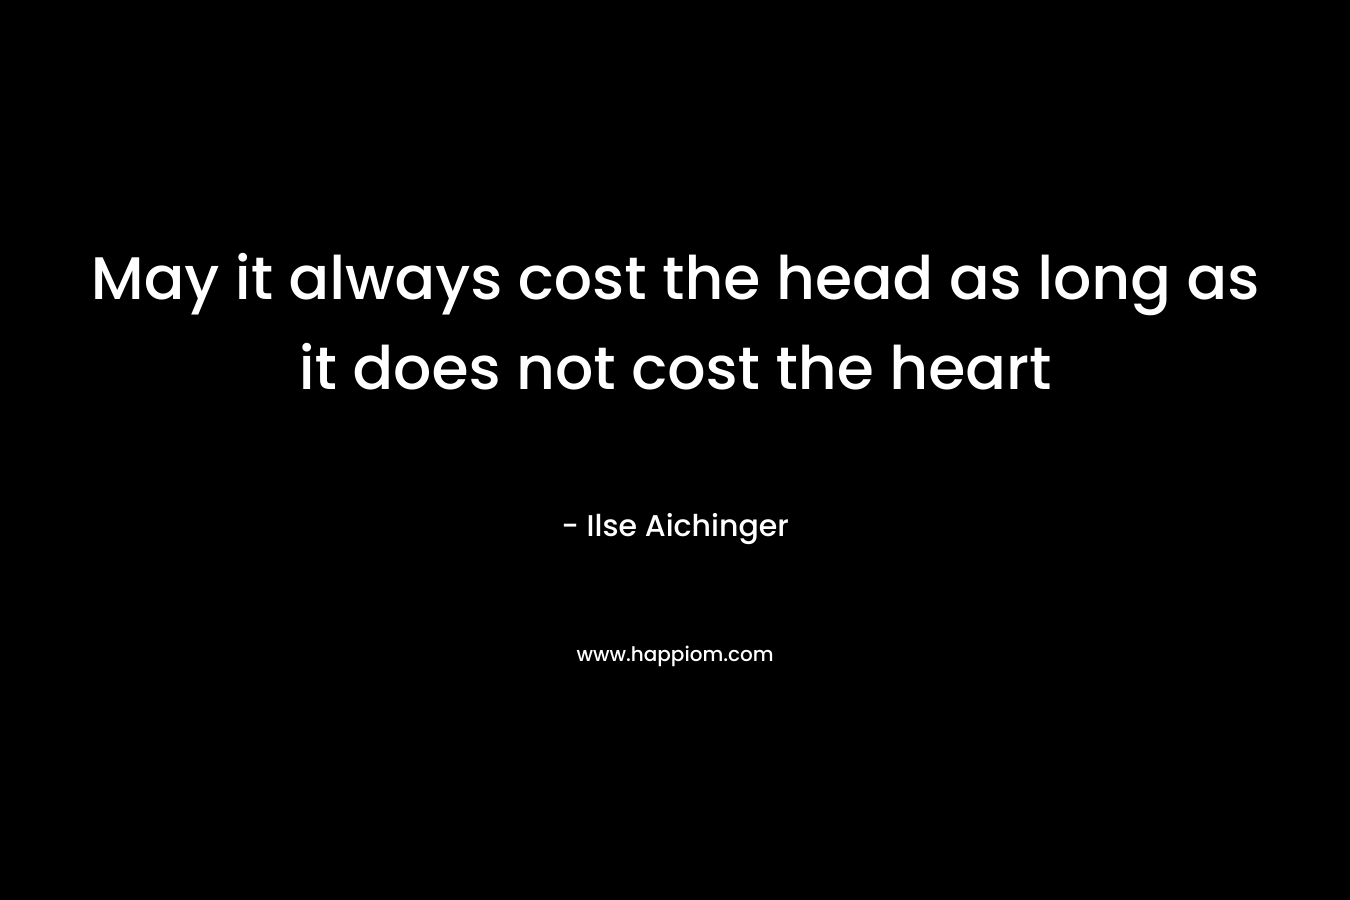 May it always cost the head as long as it does not cost the heart